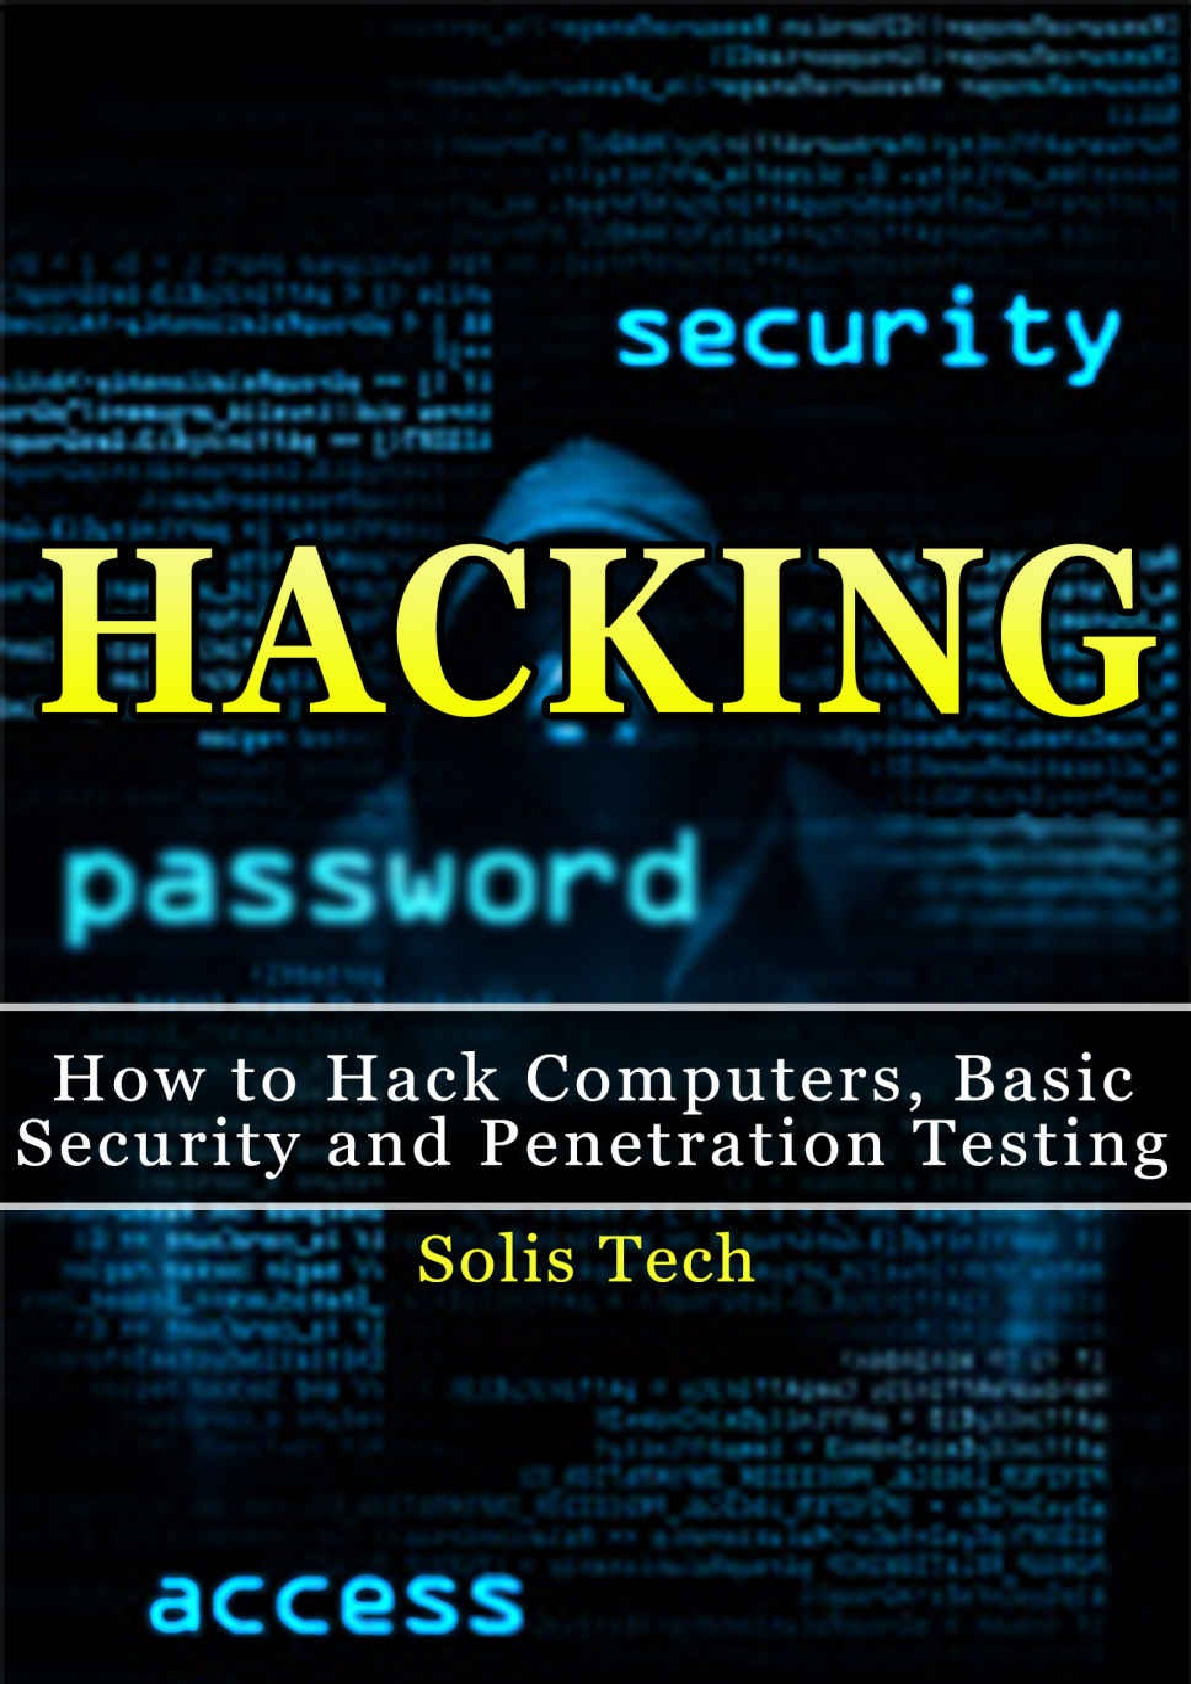 Hacking – How to Hack Computers, Basic Security and Penetration Testing – Solis Tech